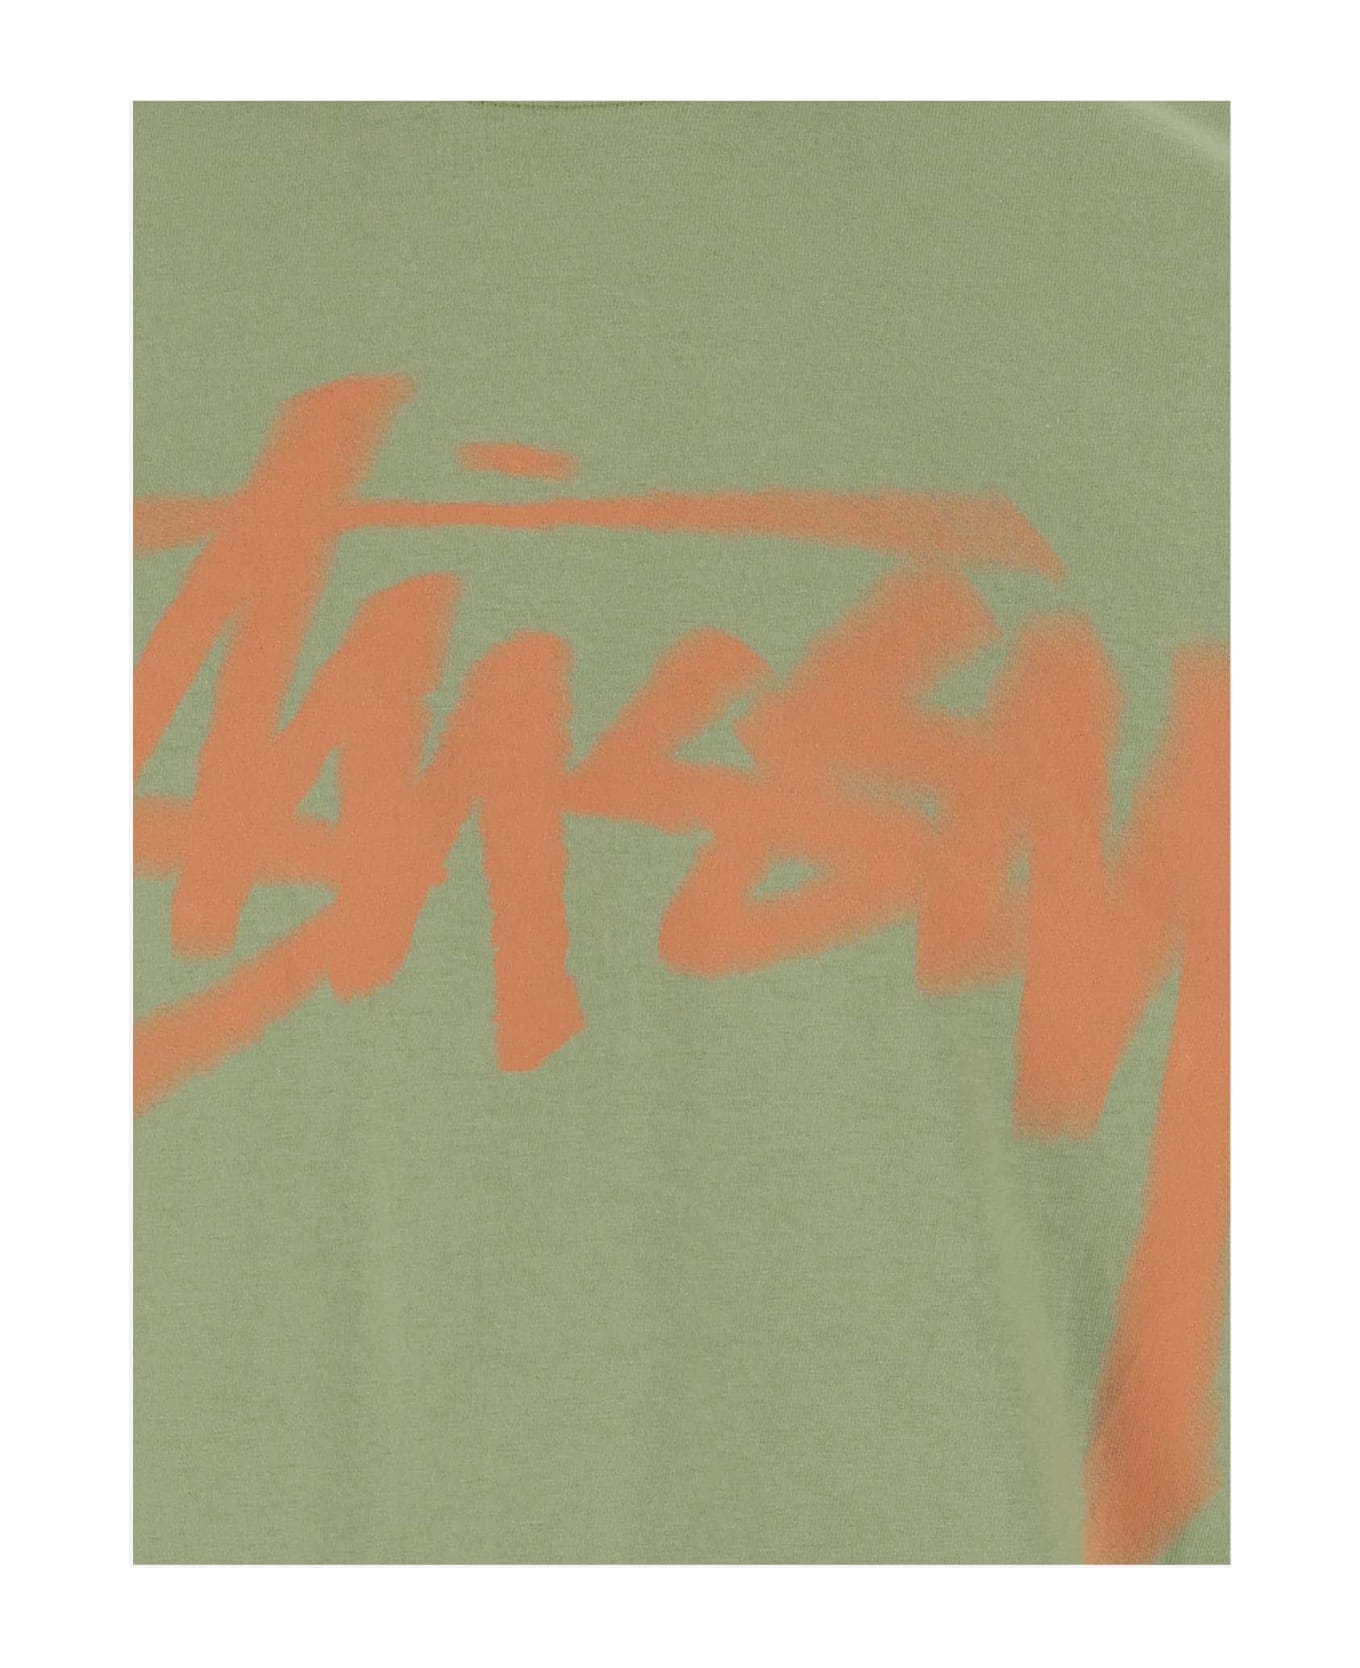 Stussy Cotton T-shirt With Logo - Moss シャツ